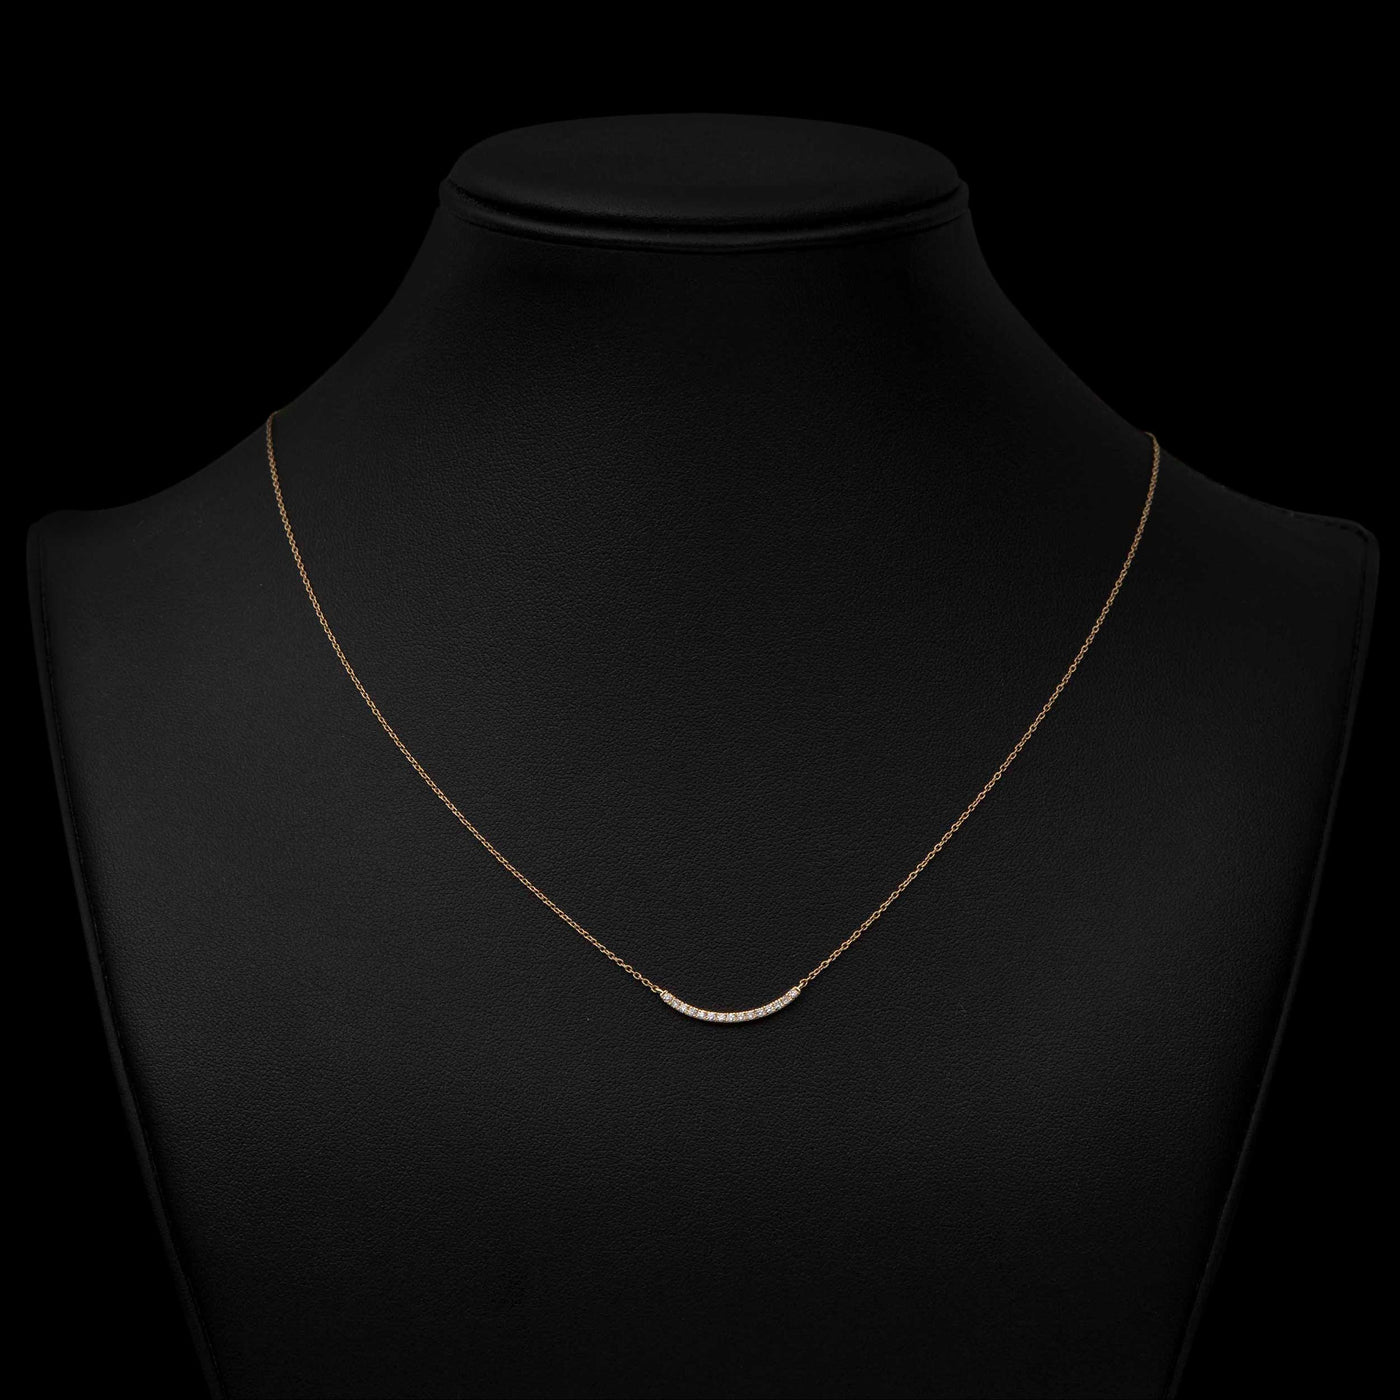 Curved Bar 0.12ctw Diamond Necklace 14K Yellow Gold